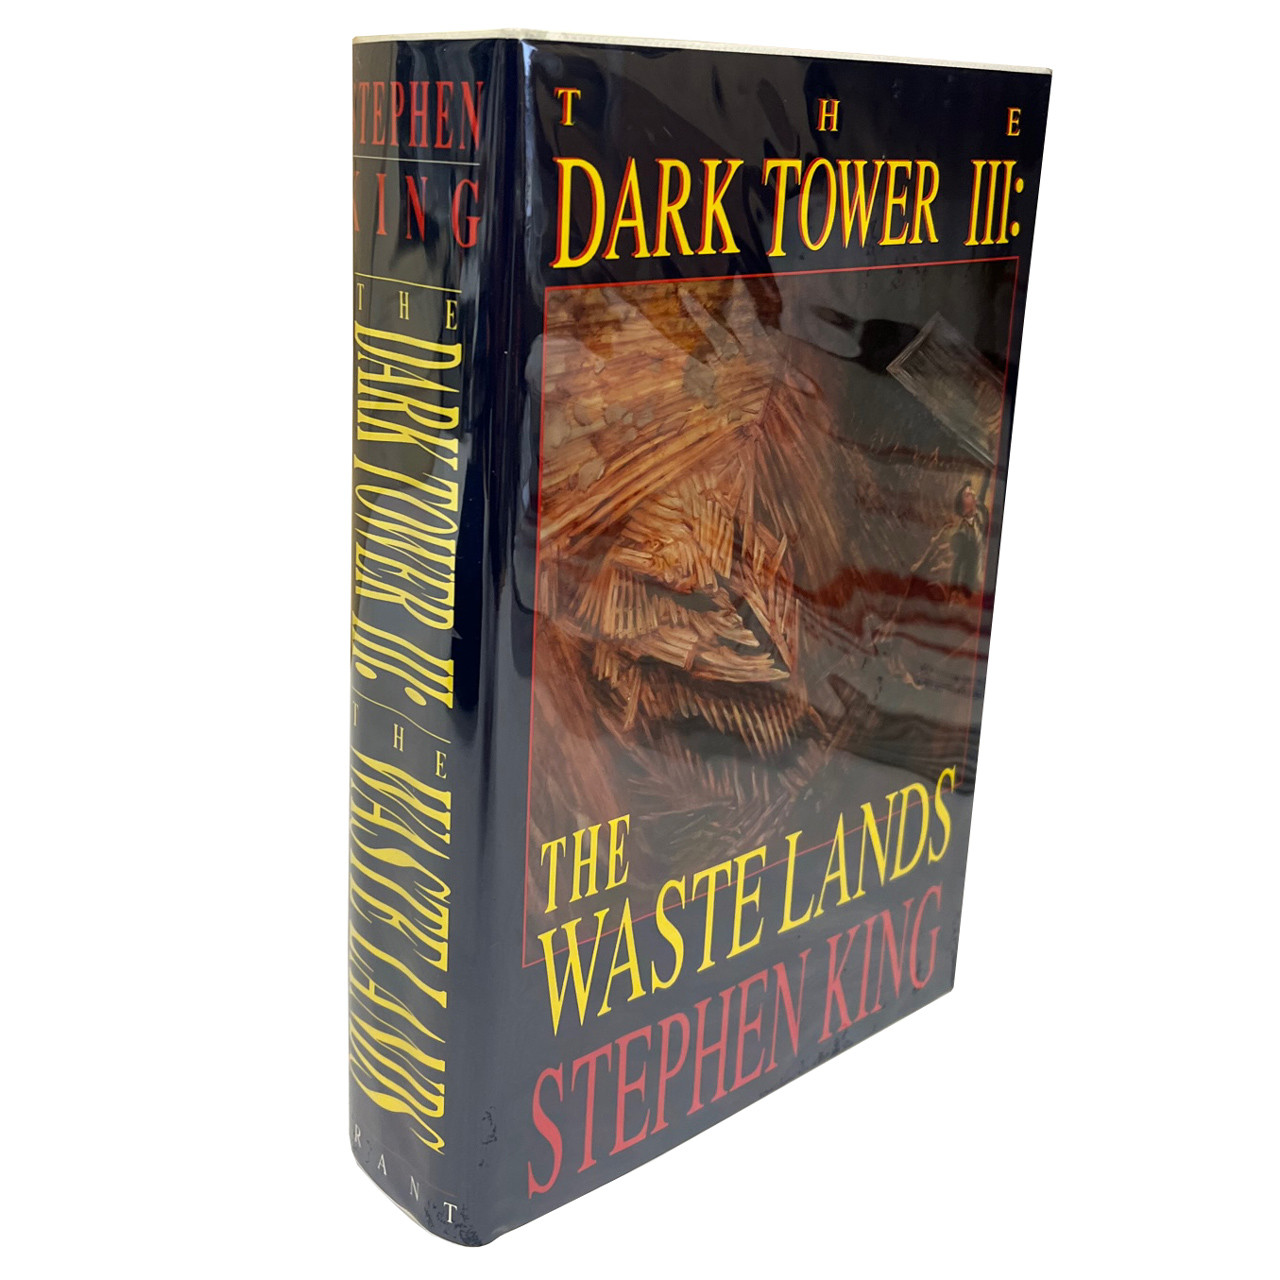 Stephen King "The Dark Tower" Volumes III-VII, "The Little Sisters Of Eluria", "The Wind Through The Keyhole", Signed Limited Edition No. 234, Matching Numbers Set, 9 Books In 12 Volumes